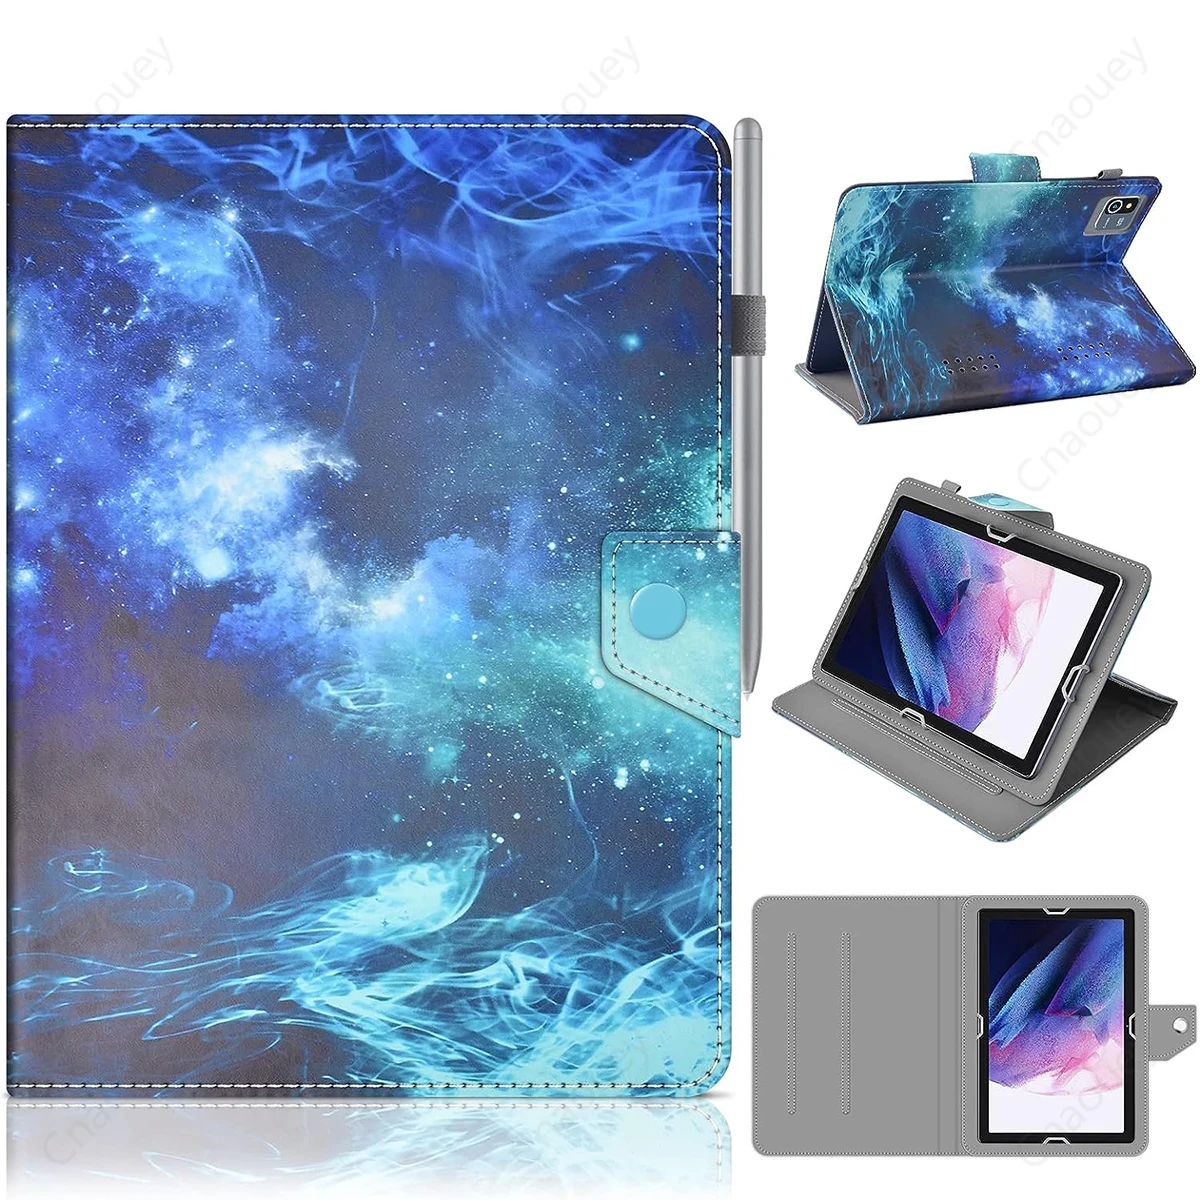 Universal Tablet Case for 9.4-10.1 inch Android IOS Windows,PU Leather Folio Stand Case for IPad Samsung Lenovo Teclast Funda